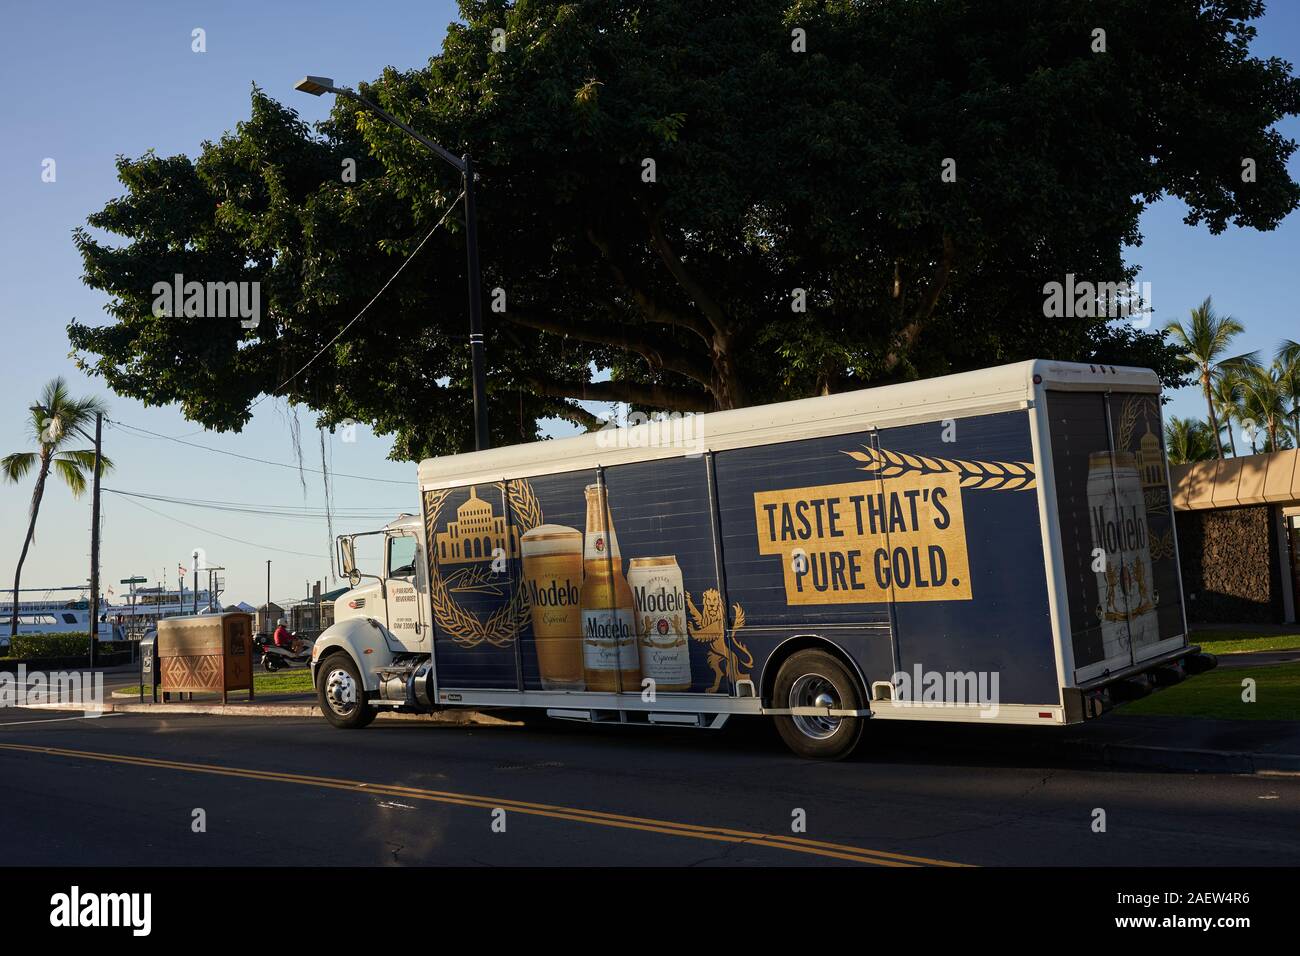 A Modelo Beer delivery truck is seen parked by the roadside at the pier in Kailua-Kona on the Big Island, Hawaii, on Friday, Nov 29, 2019. Stock Photo